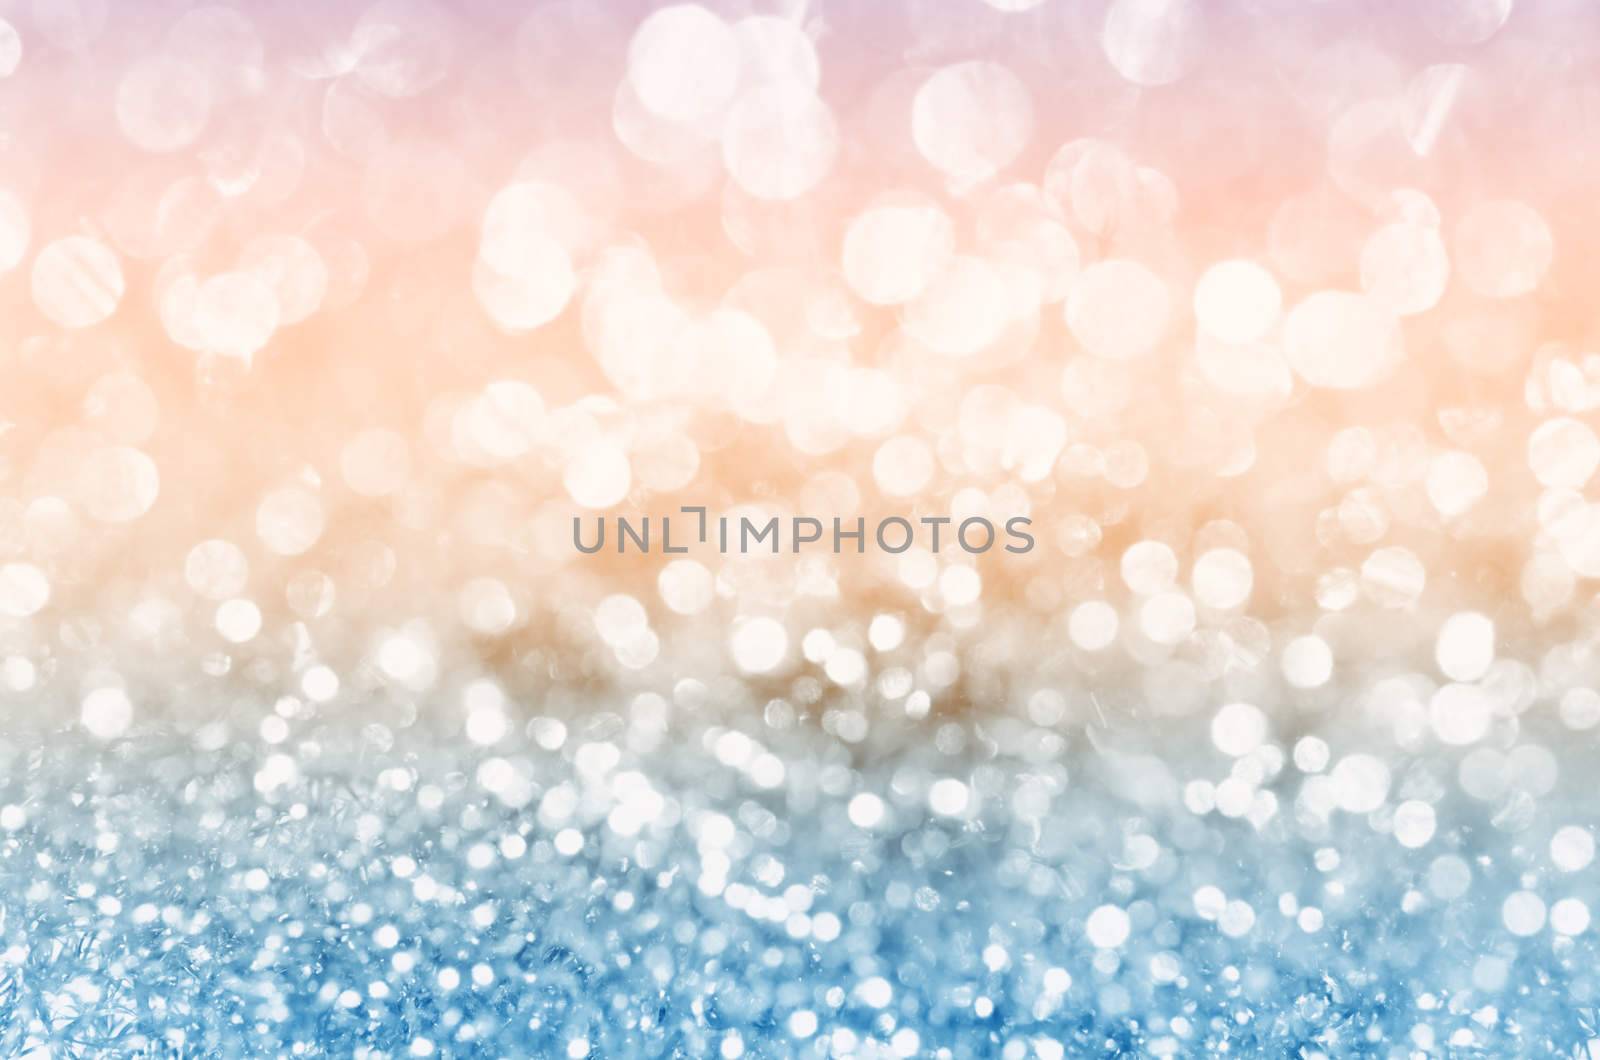 Soft pink and blue light abstract background.